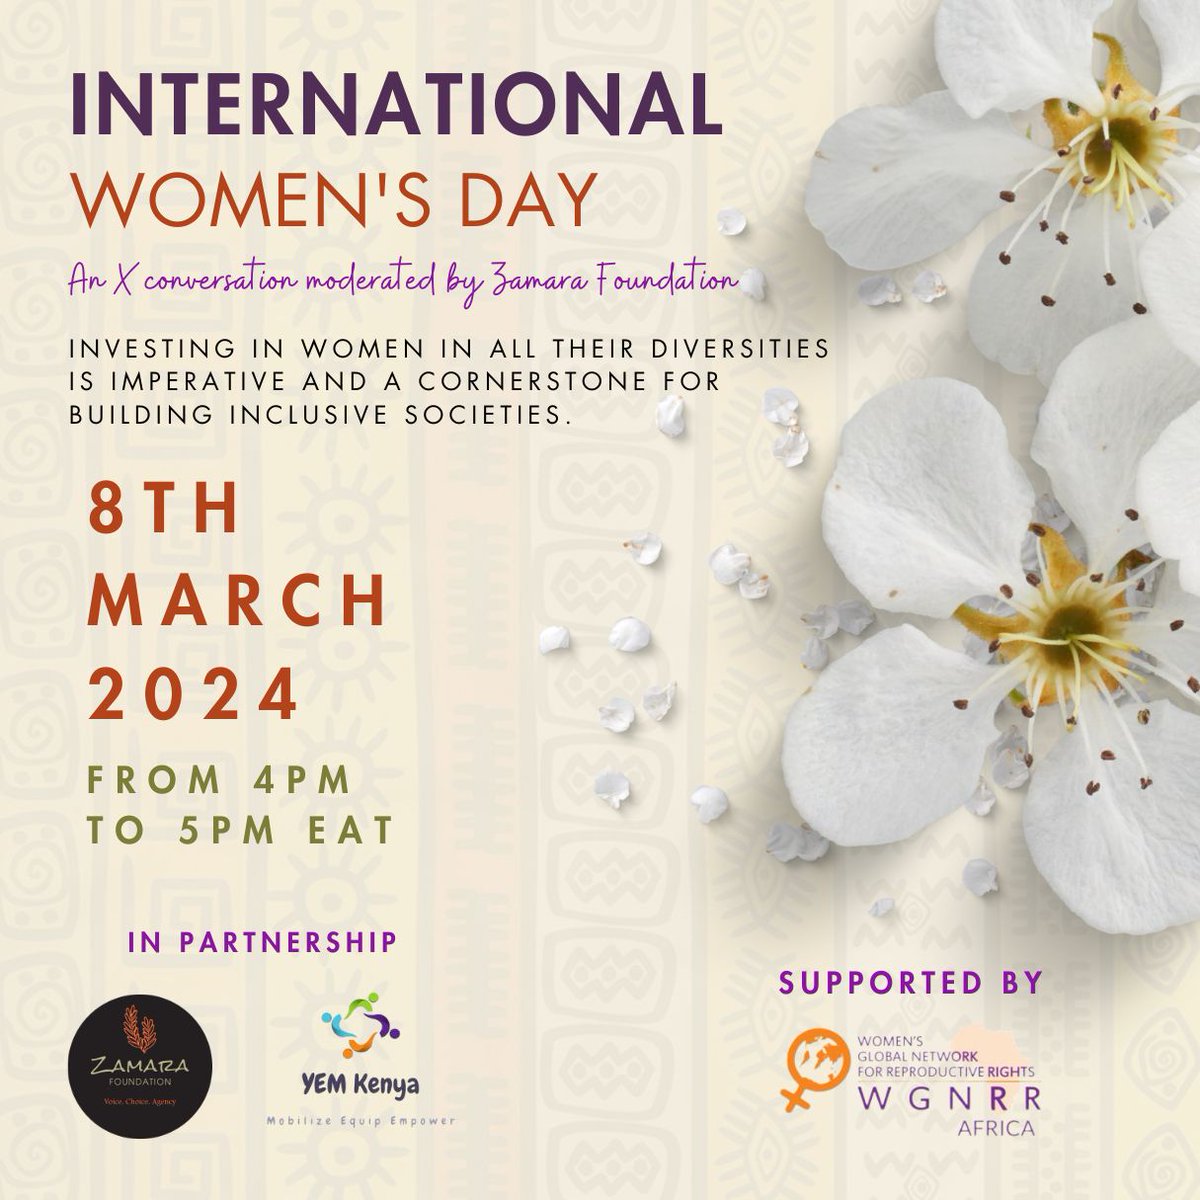 Join us as celebrate International women's day. From 4_5pm We will be engaging in an insightful  discussion.
#Invest4Equality
#zamaravoices #VoicesAgainstFGMKe
@Zamara_fdn @YEMKenya@wgnrr_africa